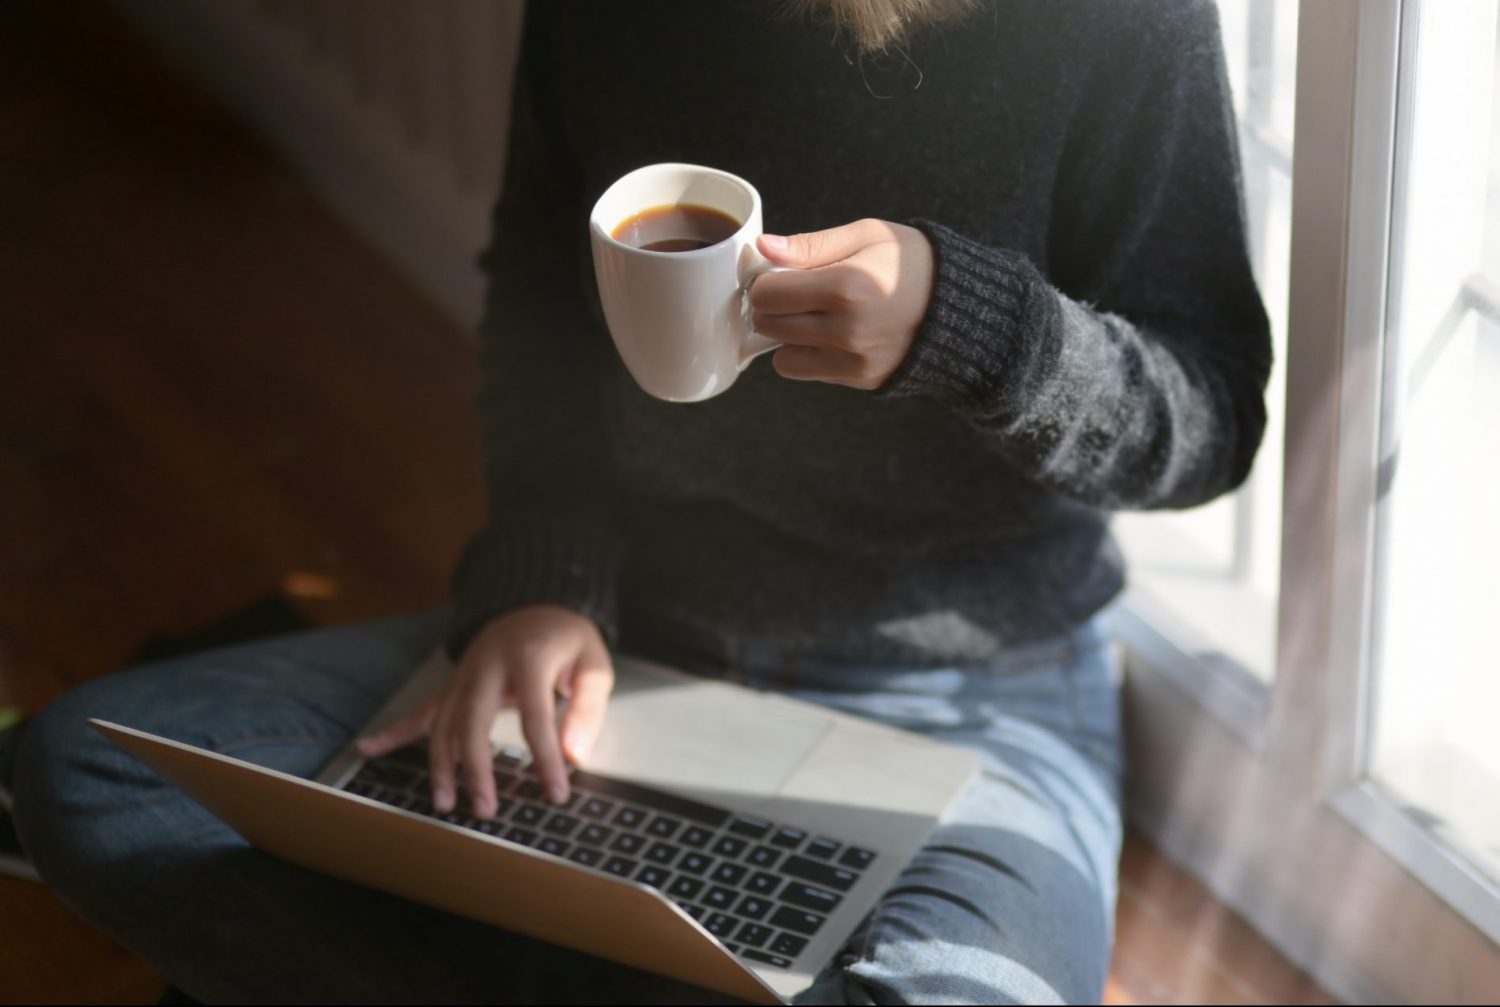 women using lap top while holding a cup of coffee